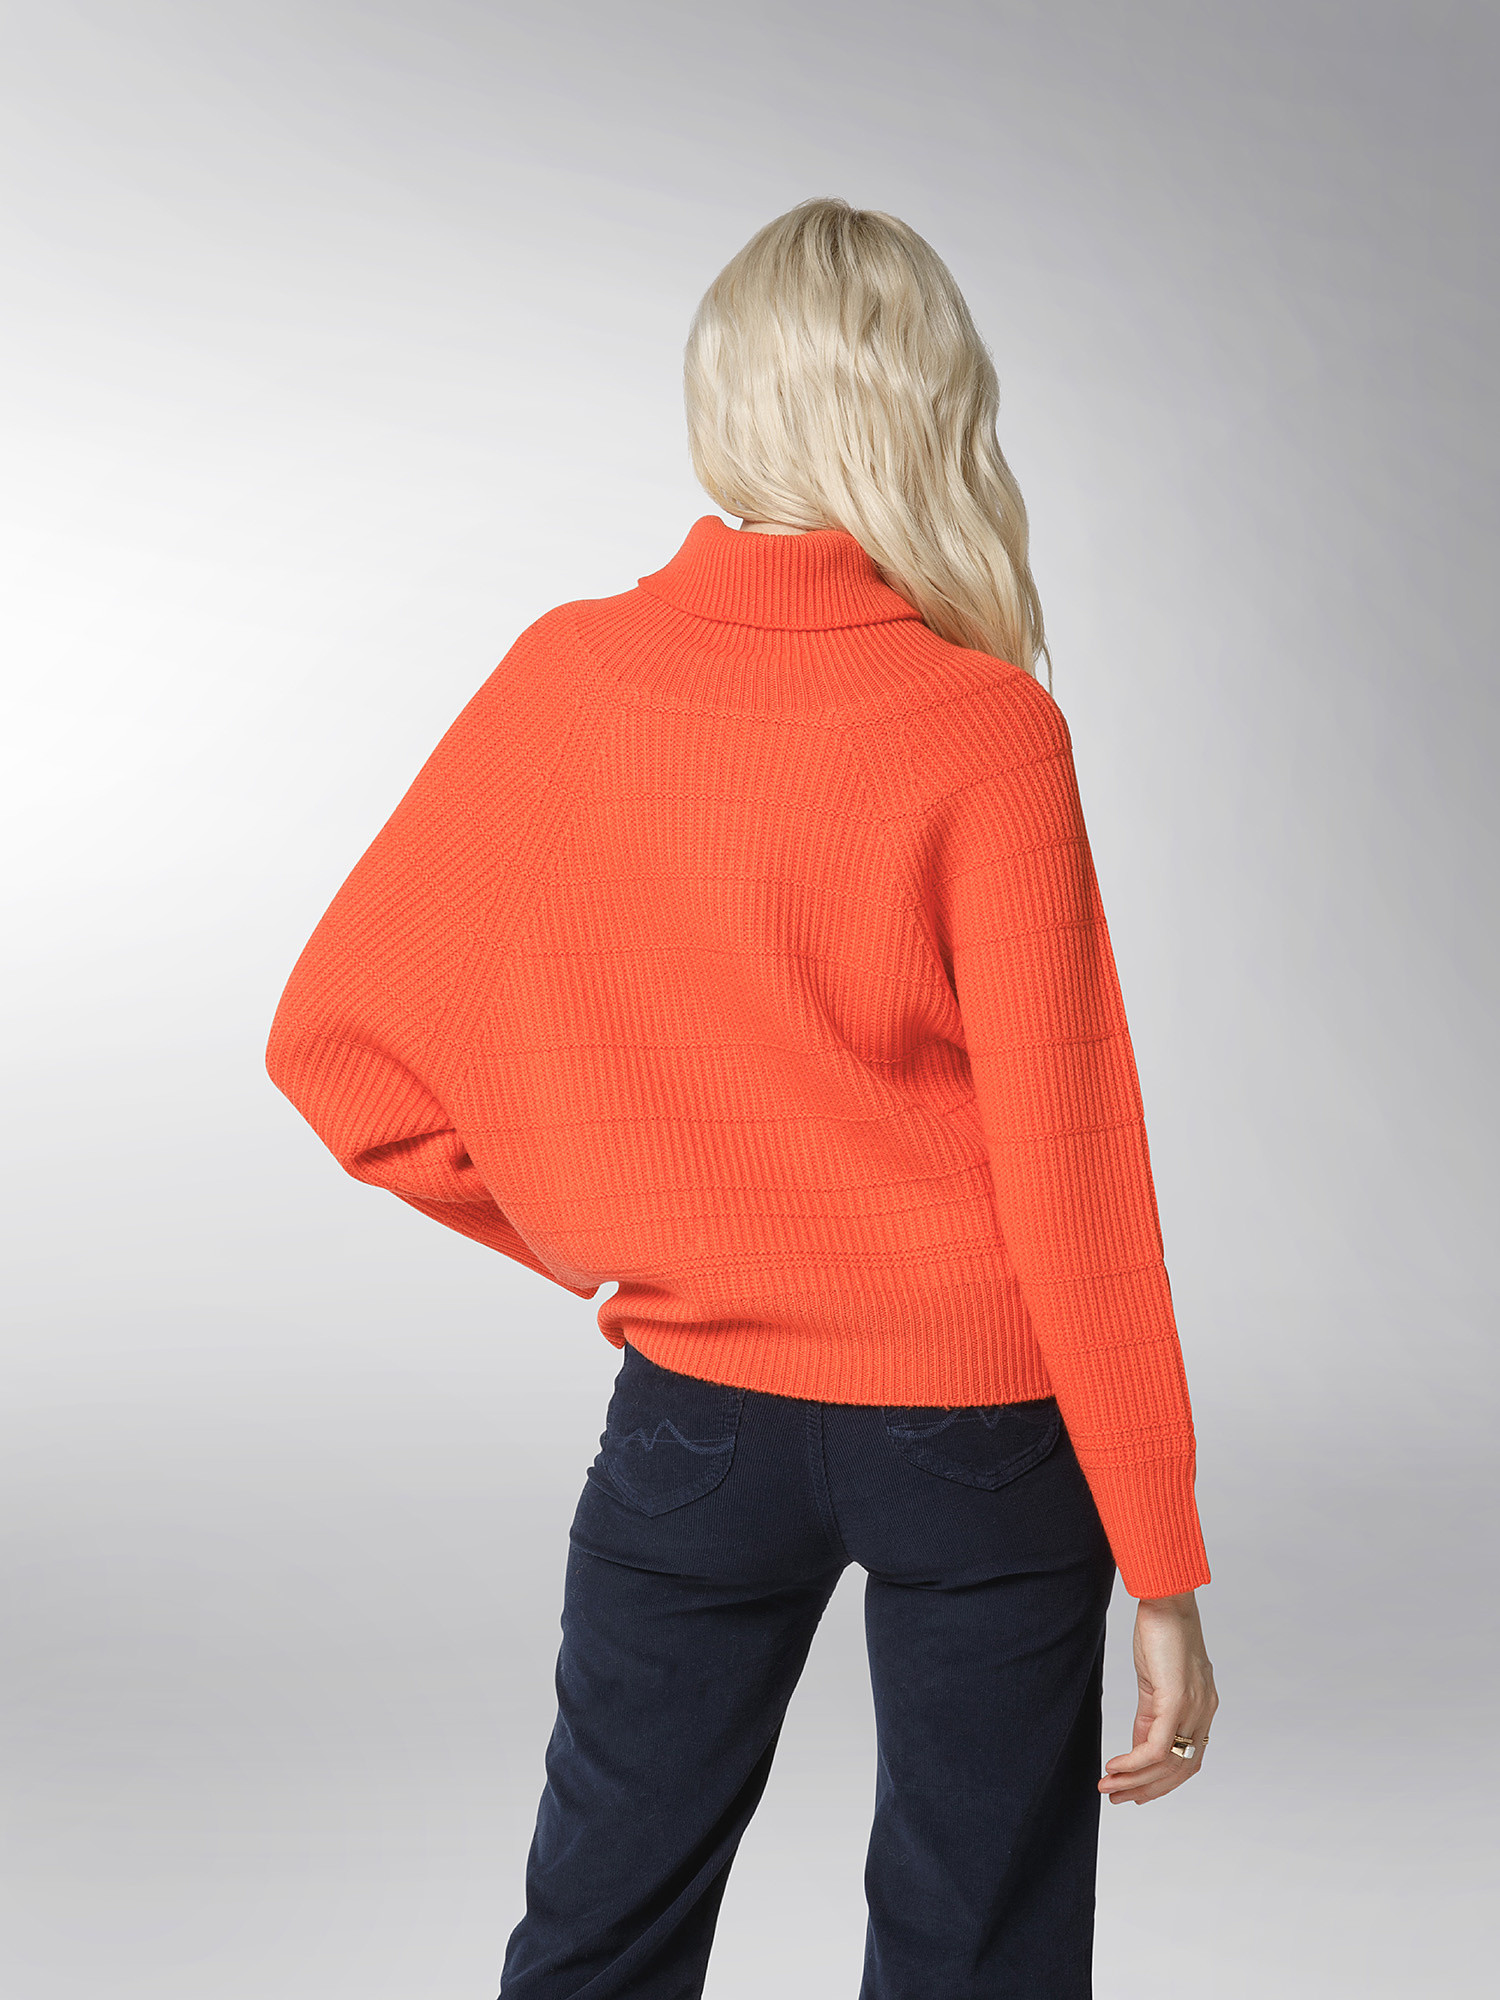 K Collection - Pullover dolcevita, Arancione, large image number 5